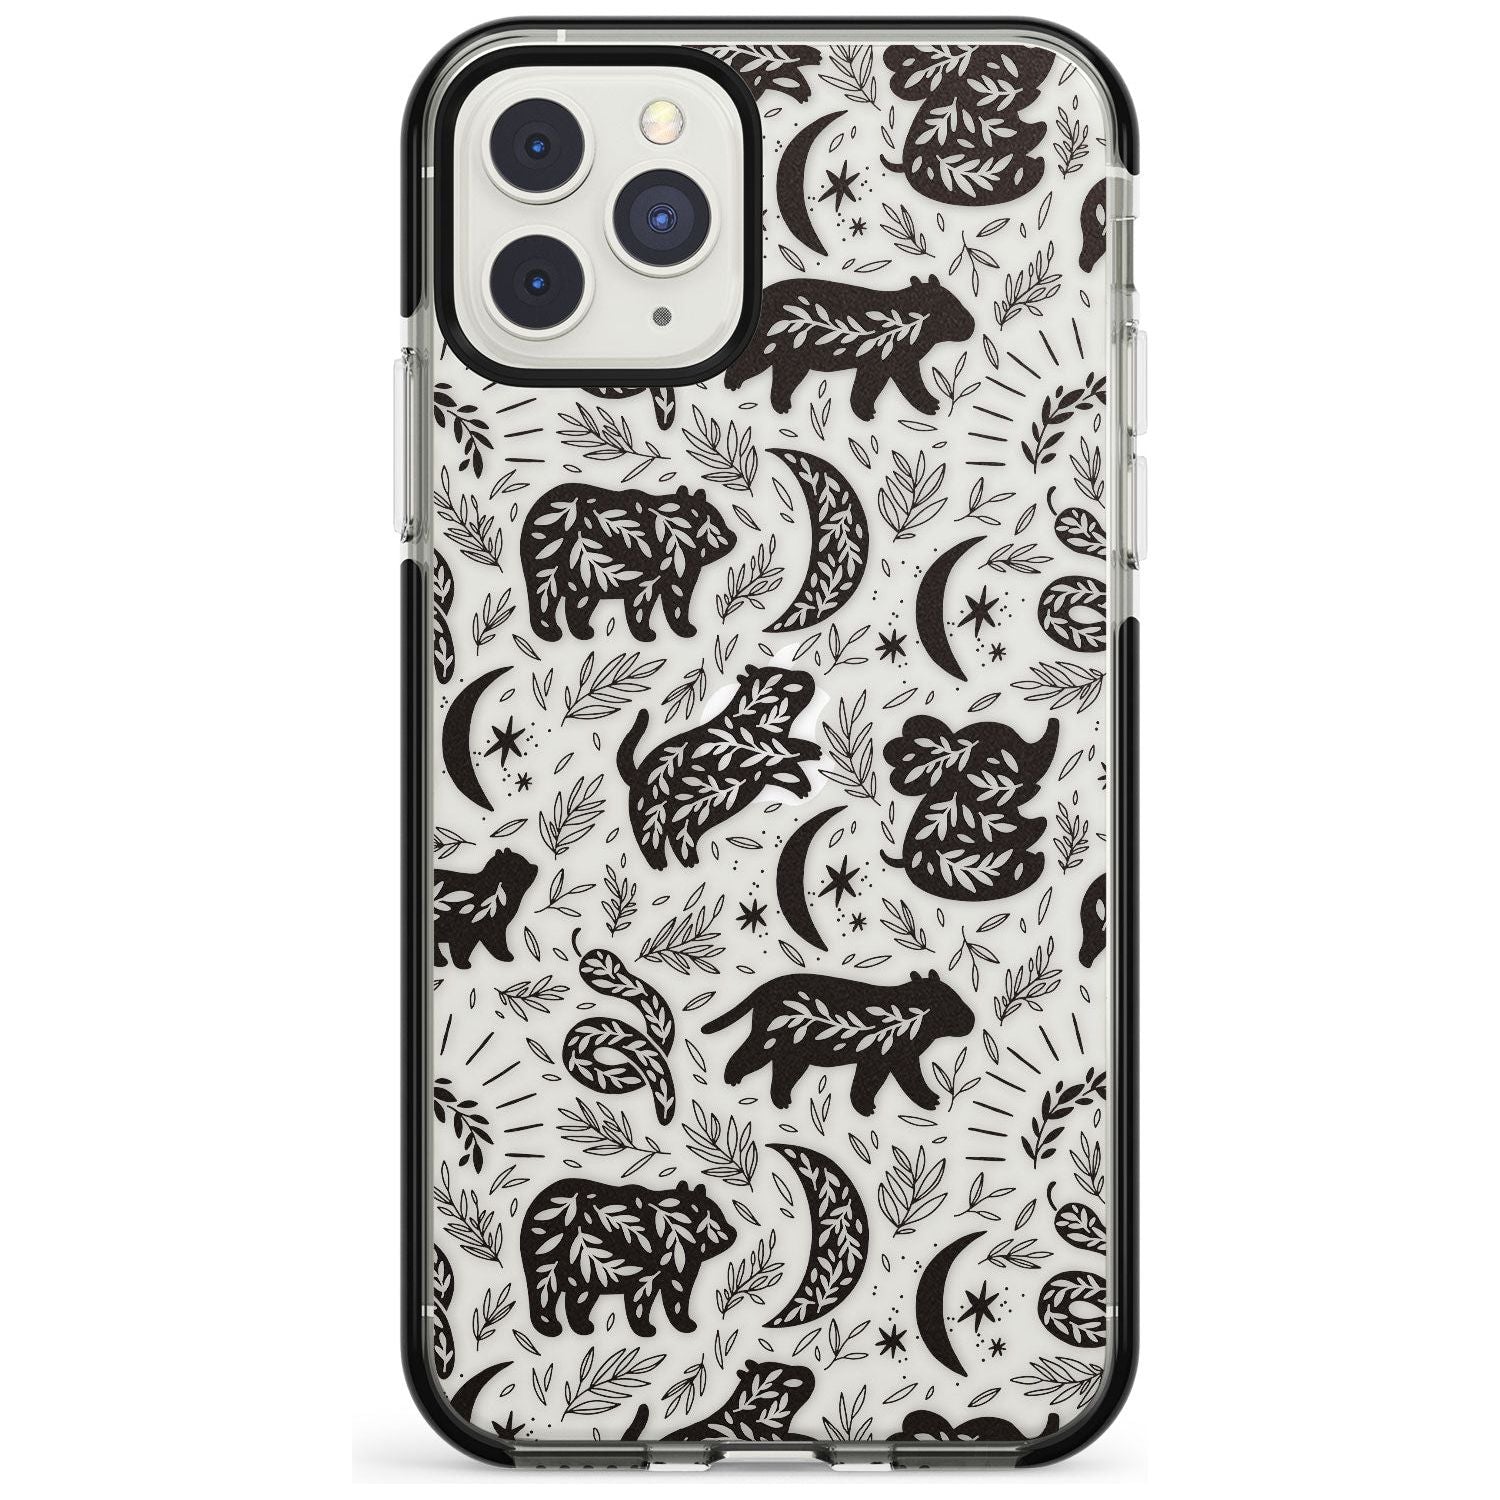 Leafy Bears Black Impact Phone Case for iPhone 11 Pro Max